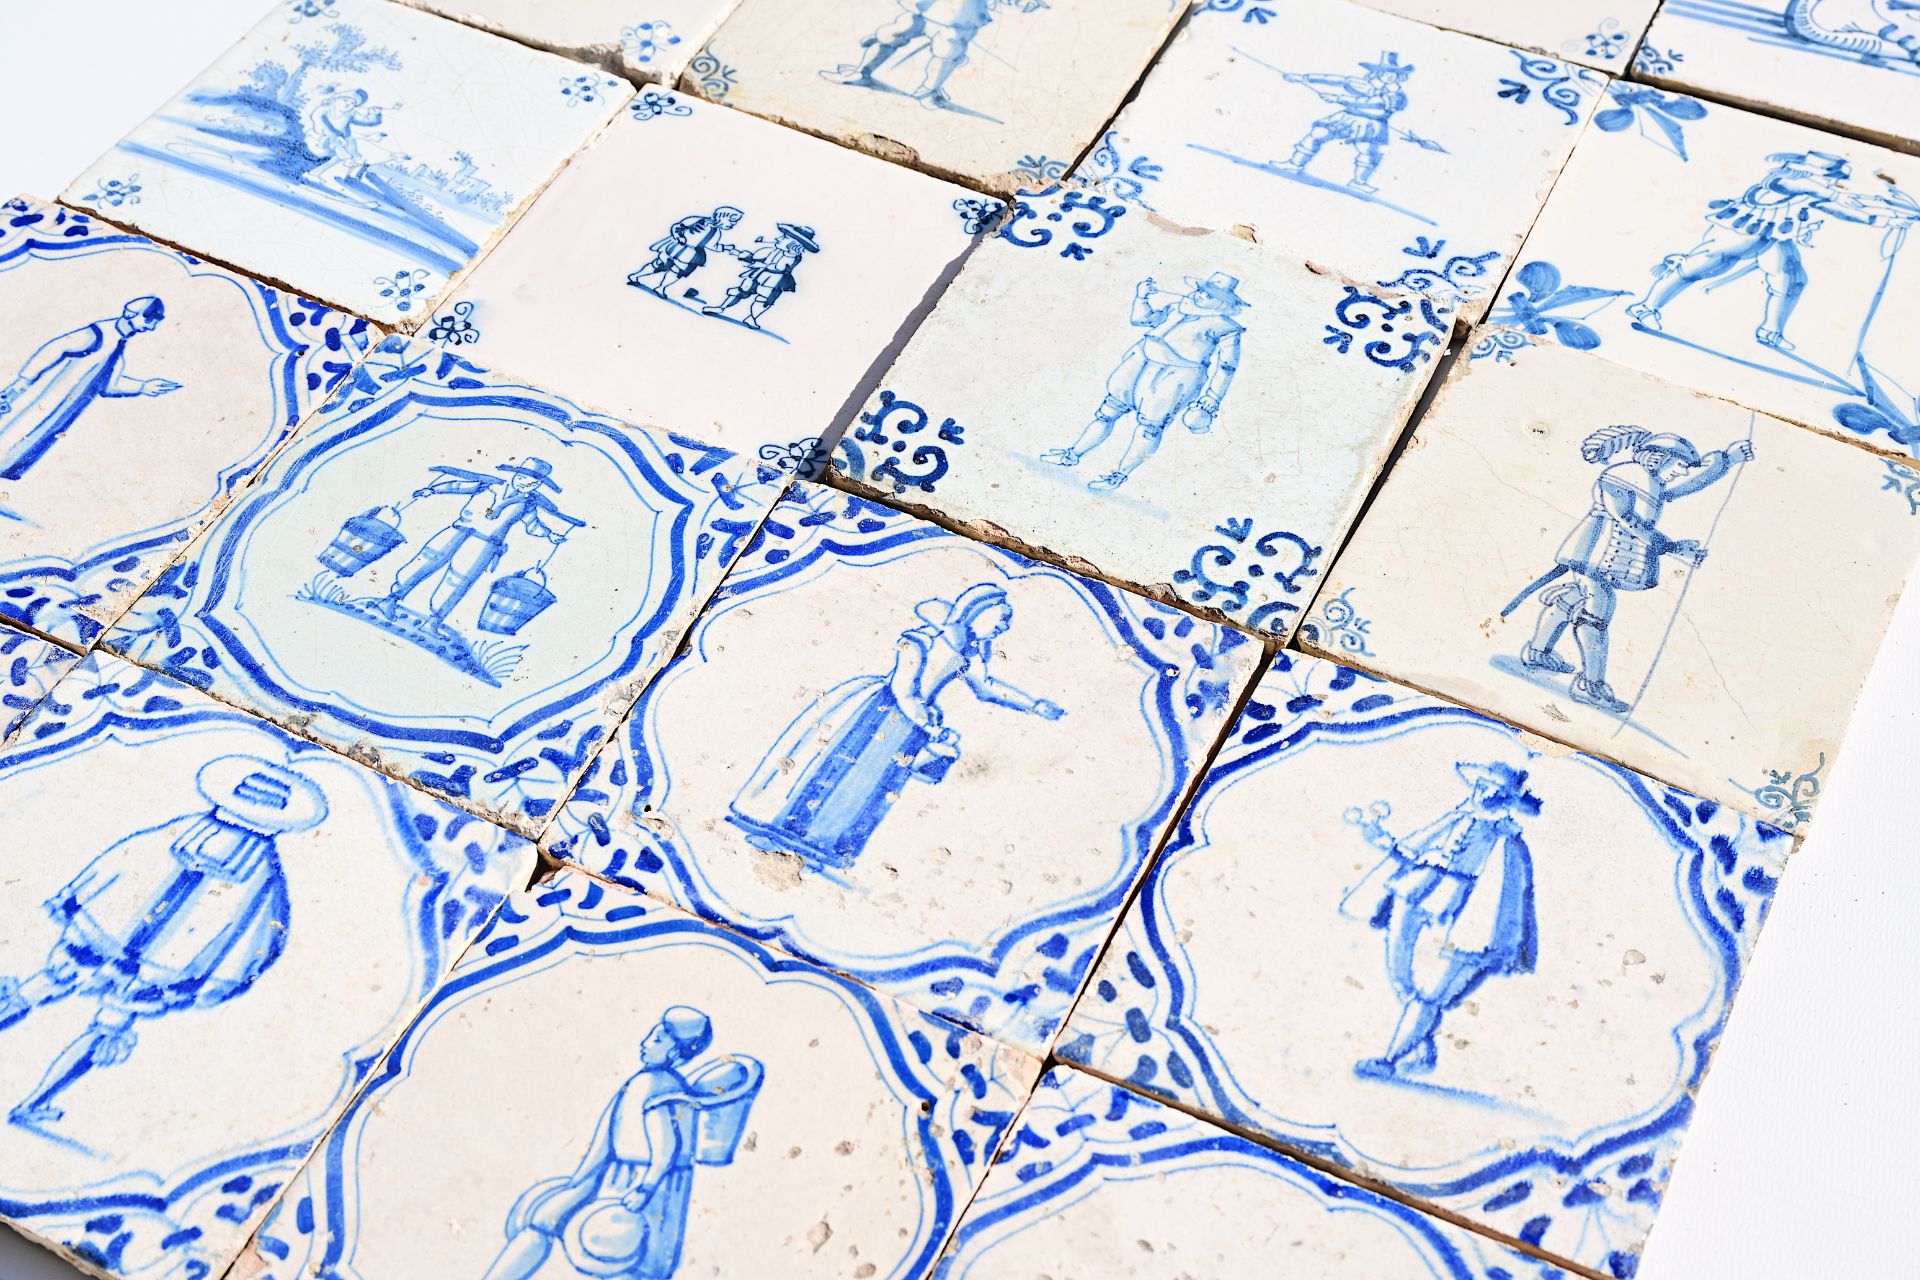 Twenty-one Dutch Delft blue and white 'figure' tiles, 17th/18th C. - Image 3 of 3